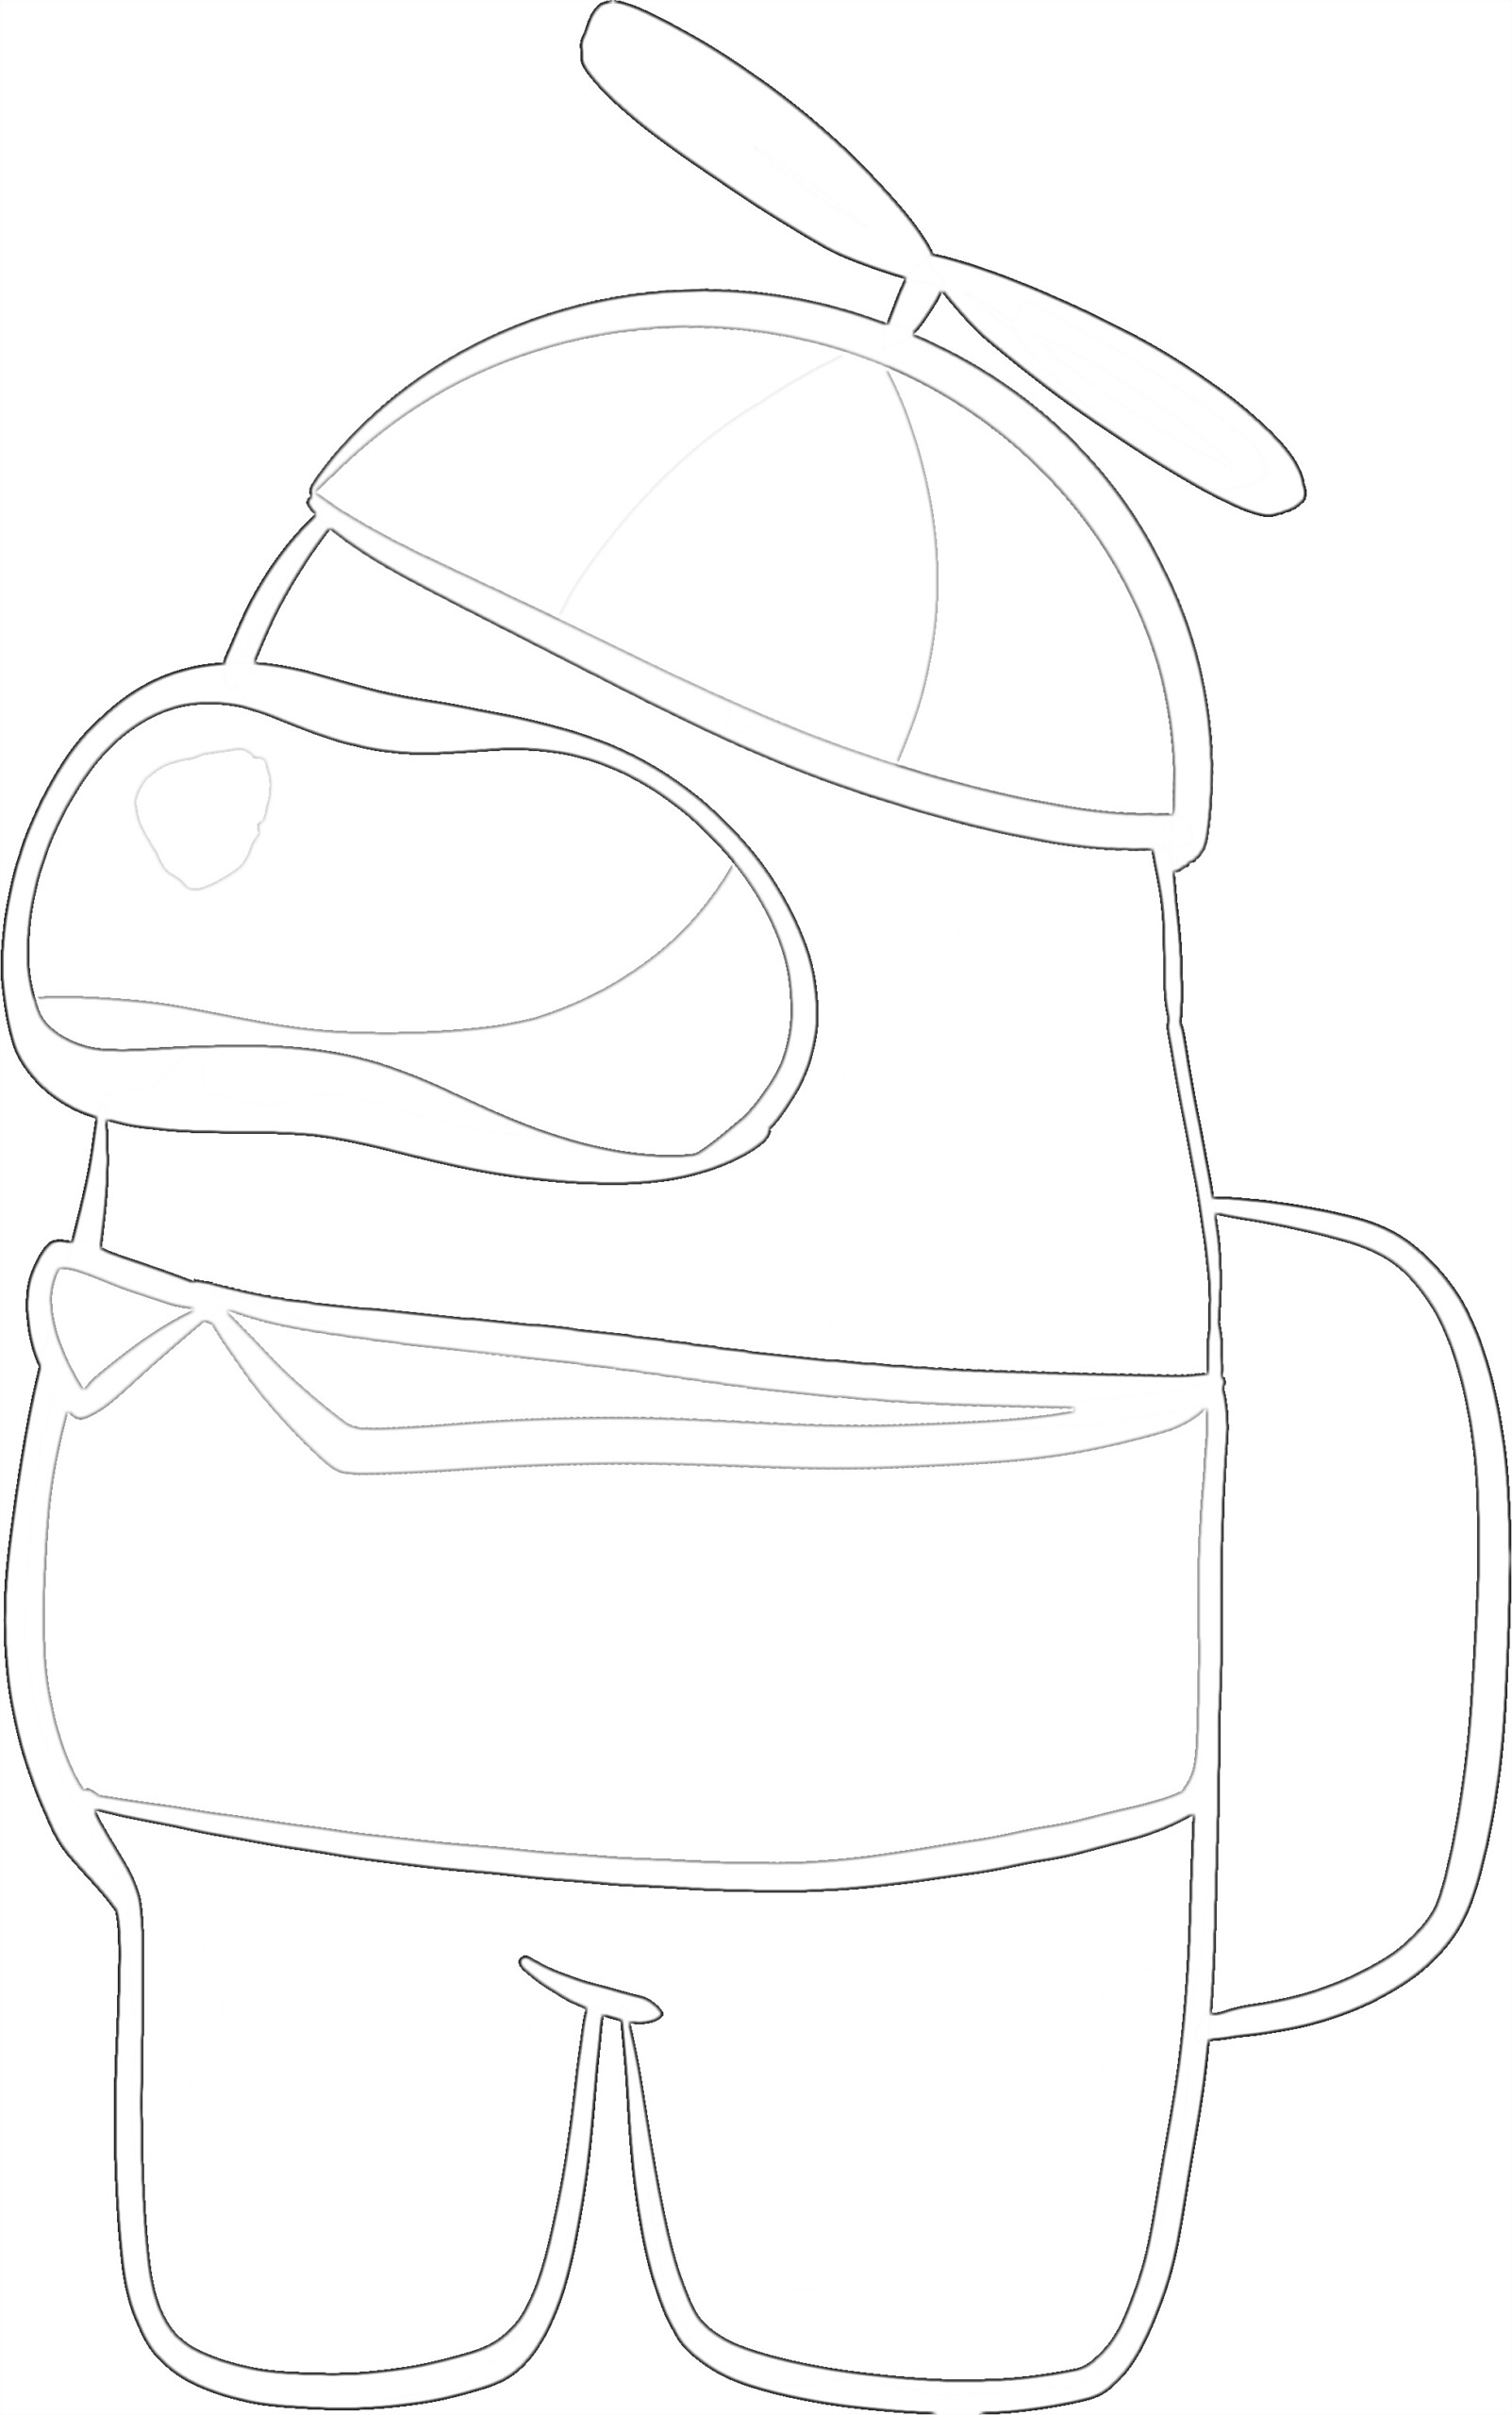 Propeller Hat - Coloring page